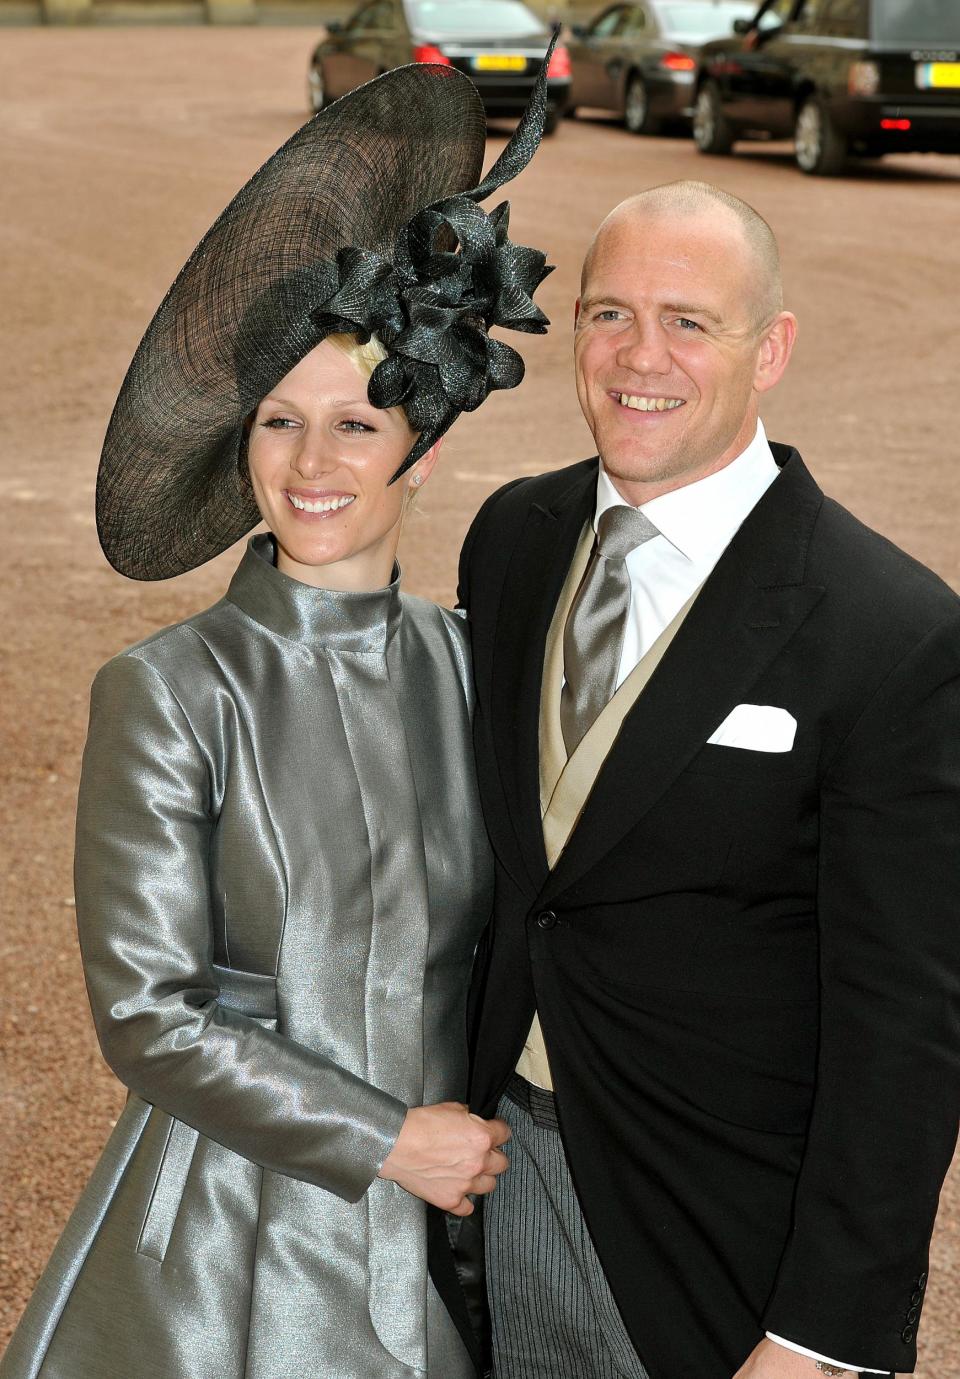 Zara Phillips and then-fiance Mike Tindall attend Prince William and Catherine Middleton's wedding in 2011(Getty Images)